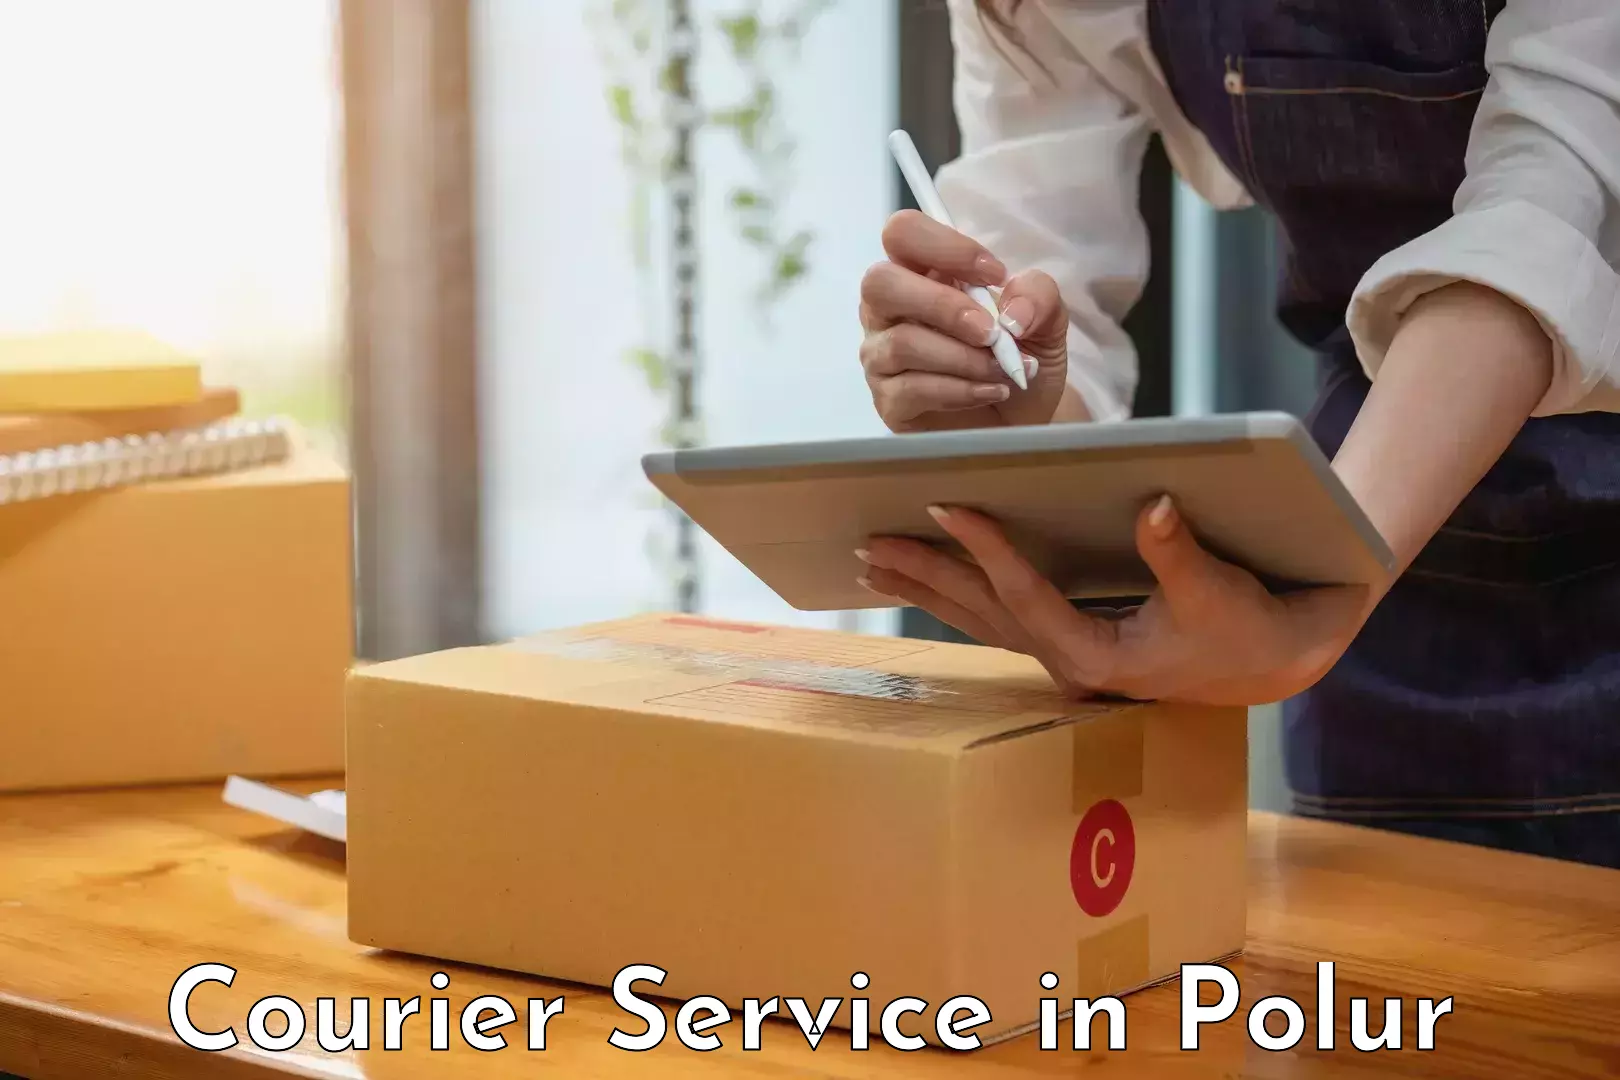 Efficient courier operations in Polur